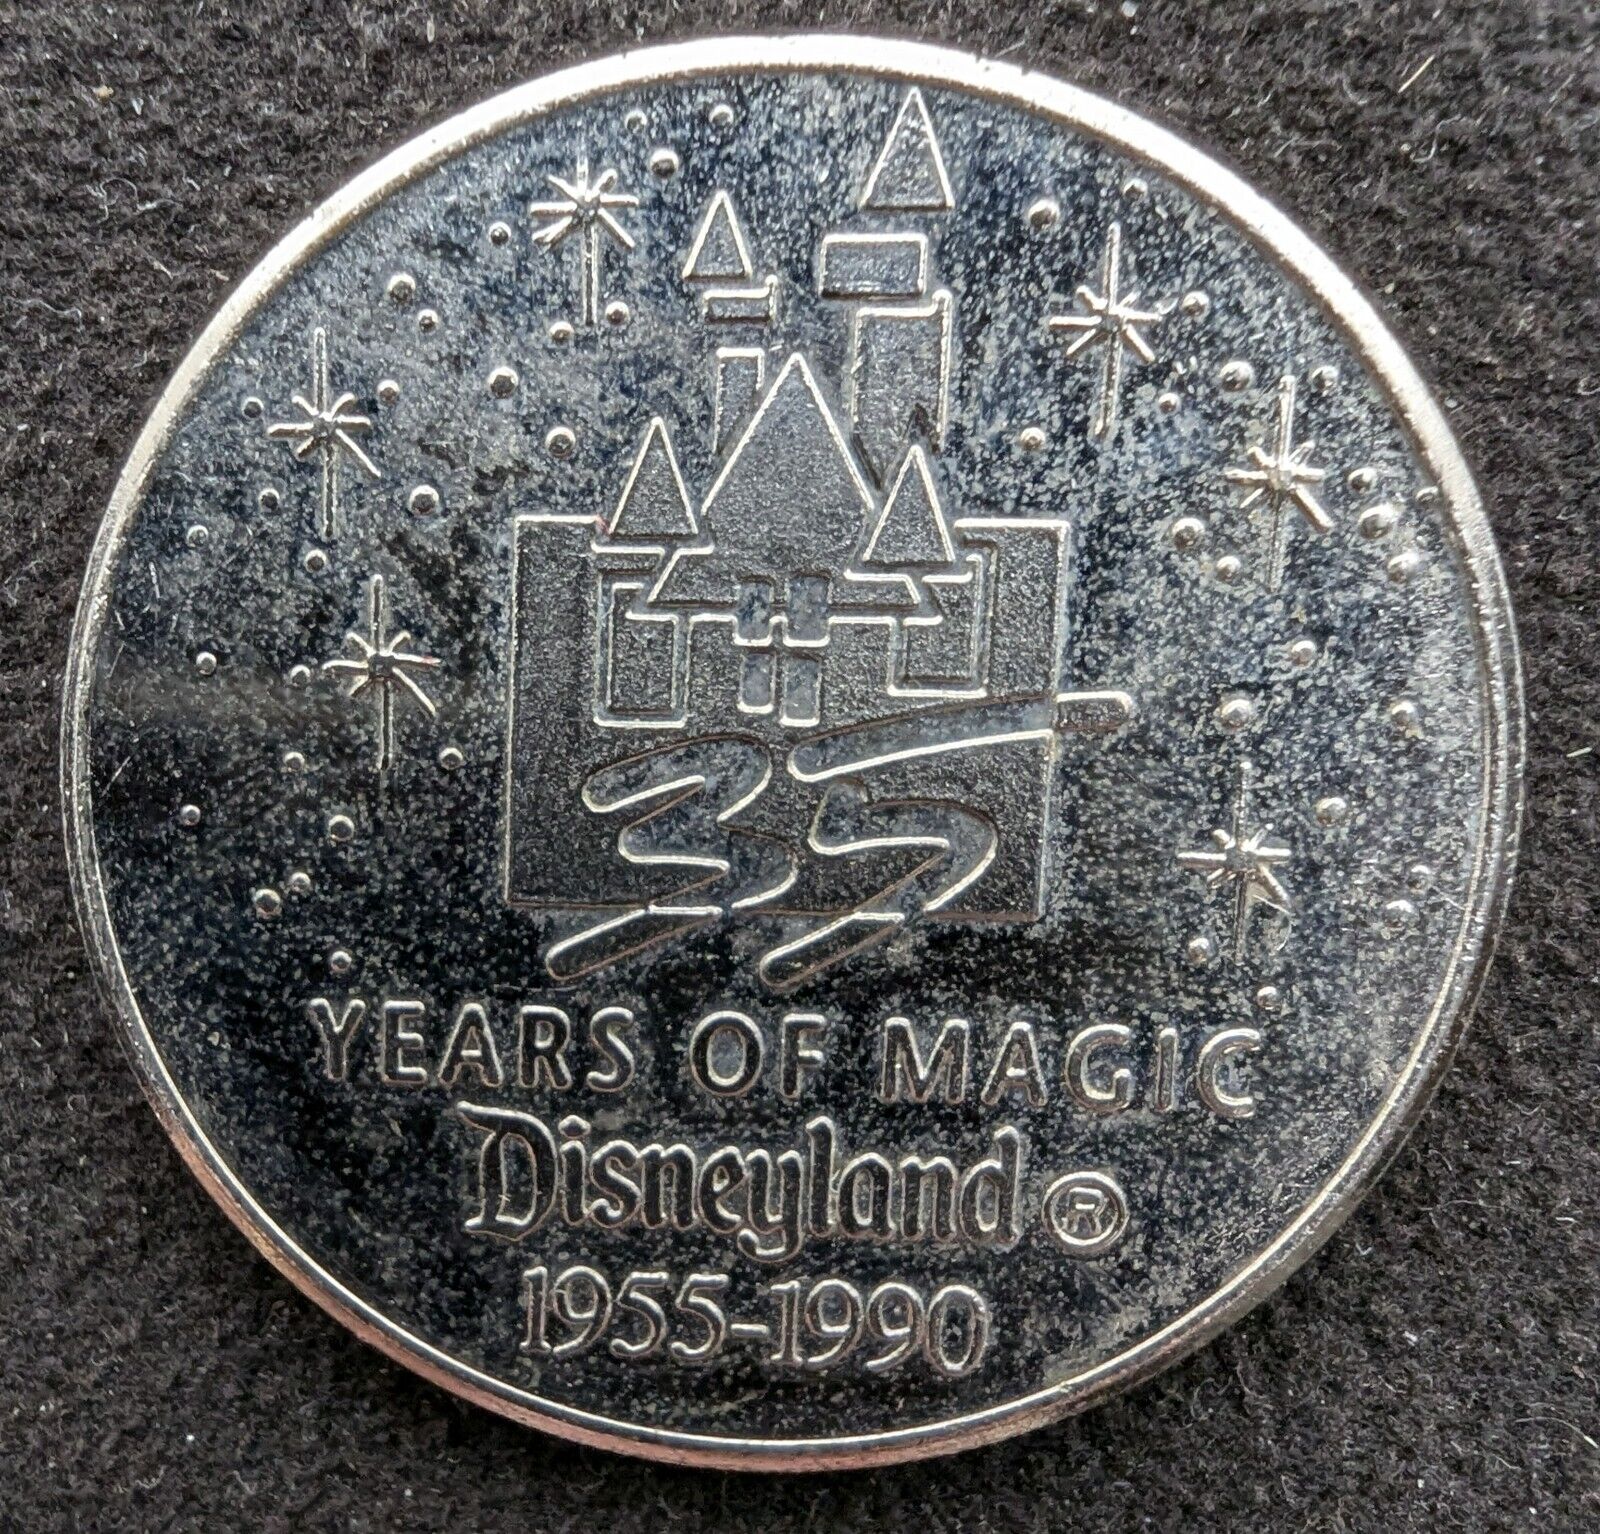 Disneyland Commemorative Coin 35 Years of Magic Silver Plated 1990